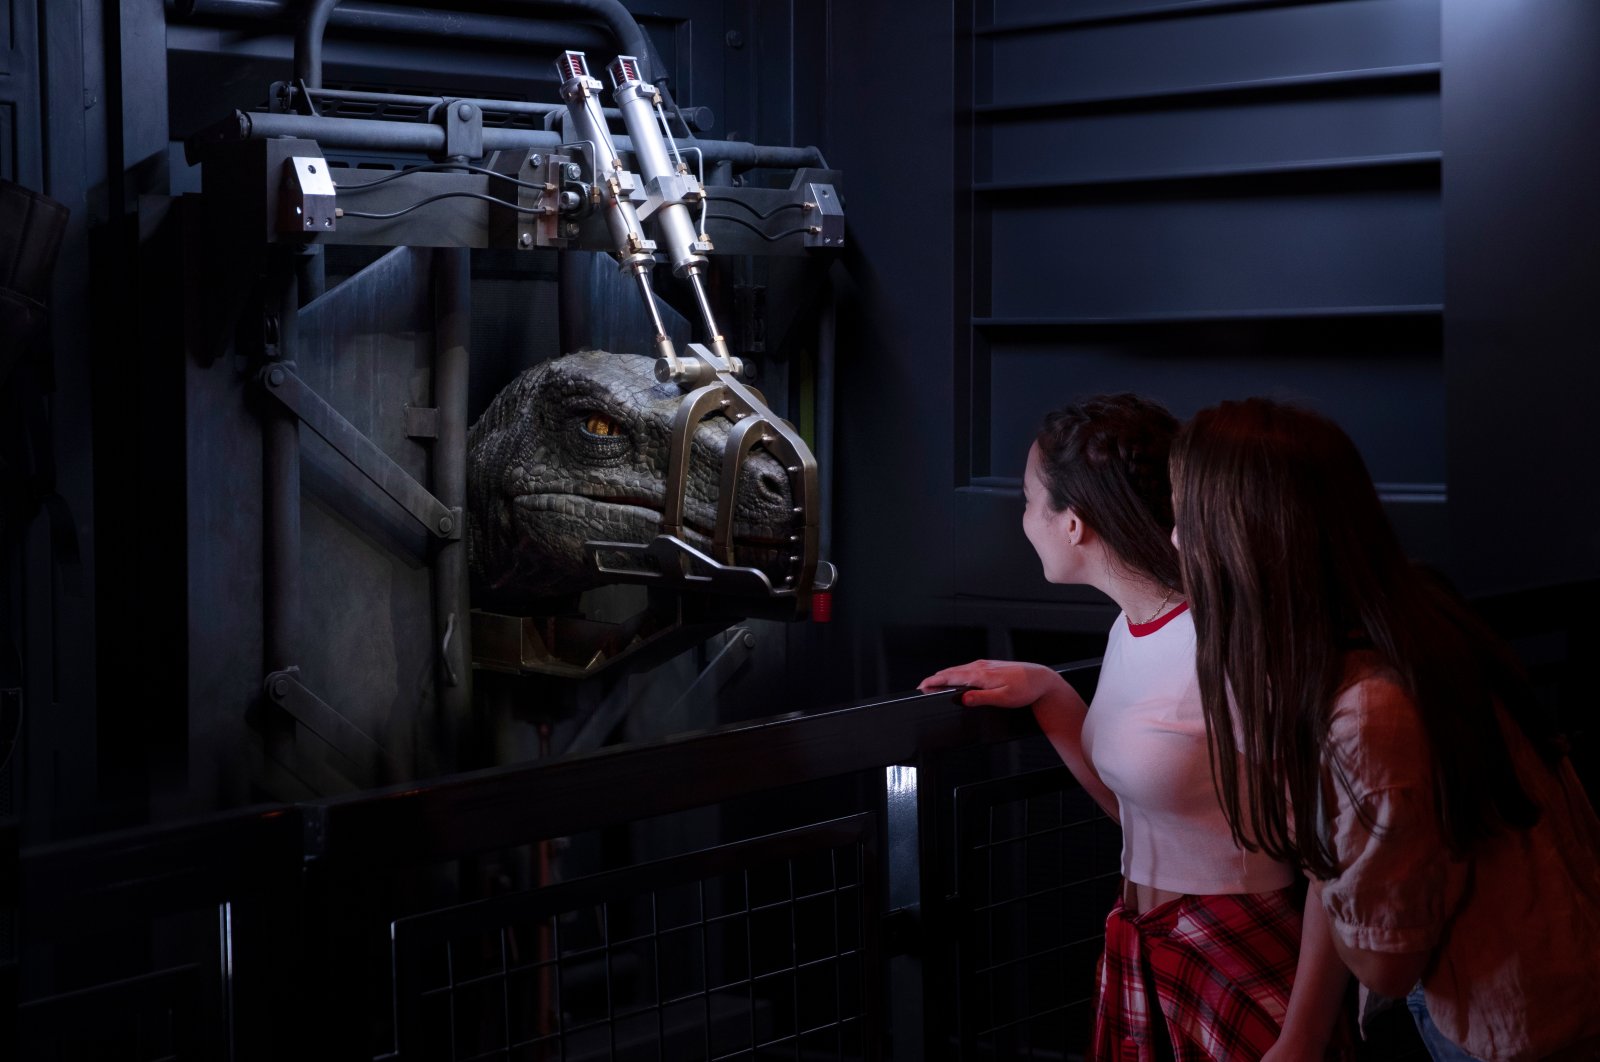 Florida&#039;s Universal Orlando Resort is set to launch its first escape rooms later in 2022, one of which is based on the &quot;Jurassic World&quot; film series, U.S., April 23, 2021. (dpa Photo)